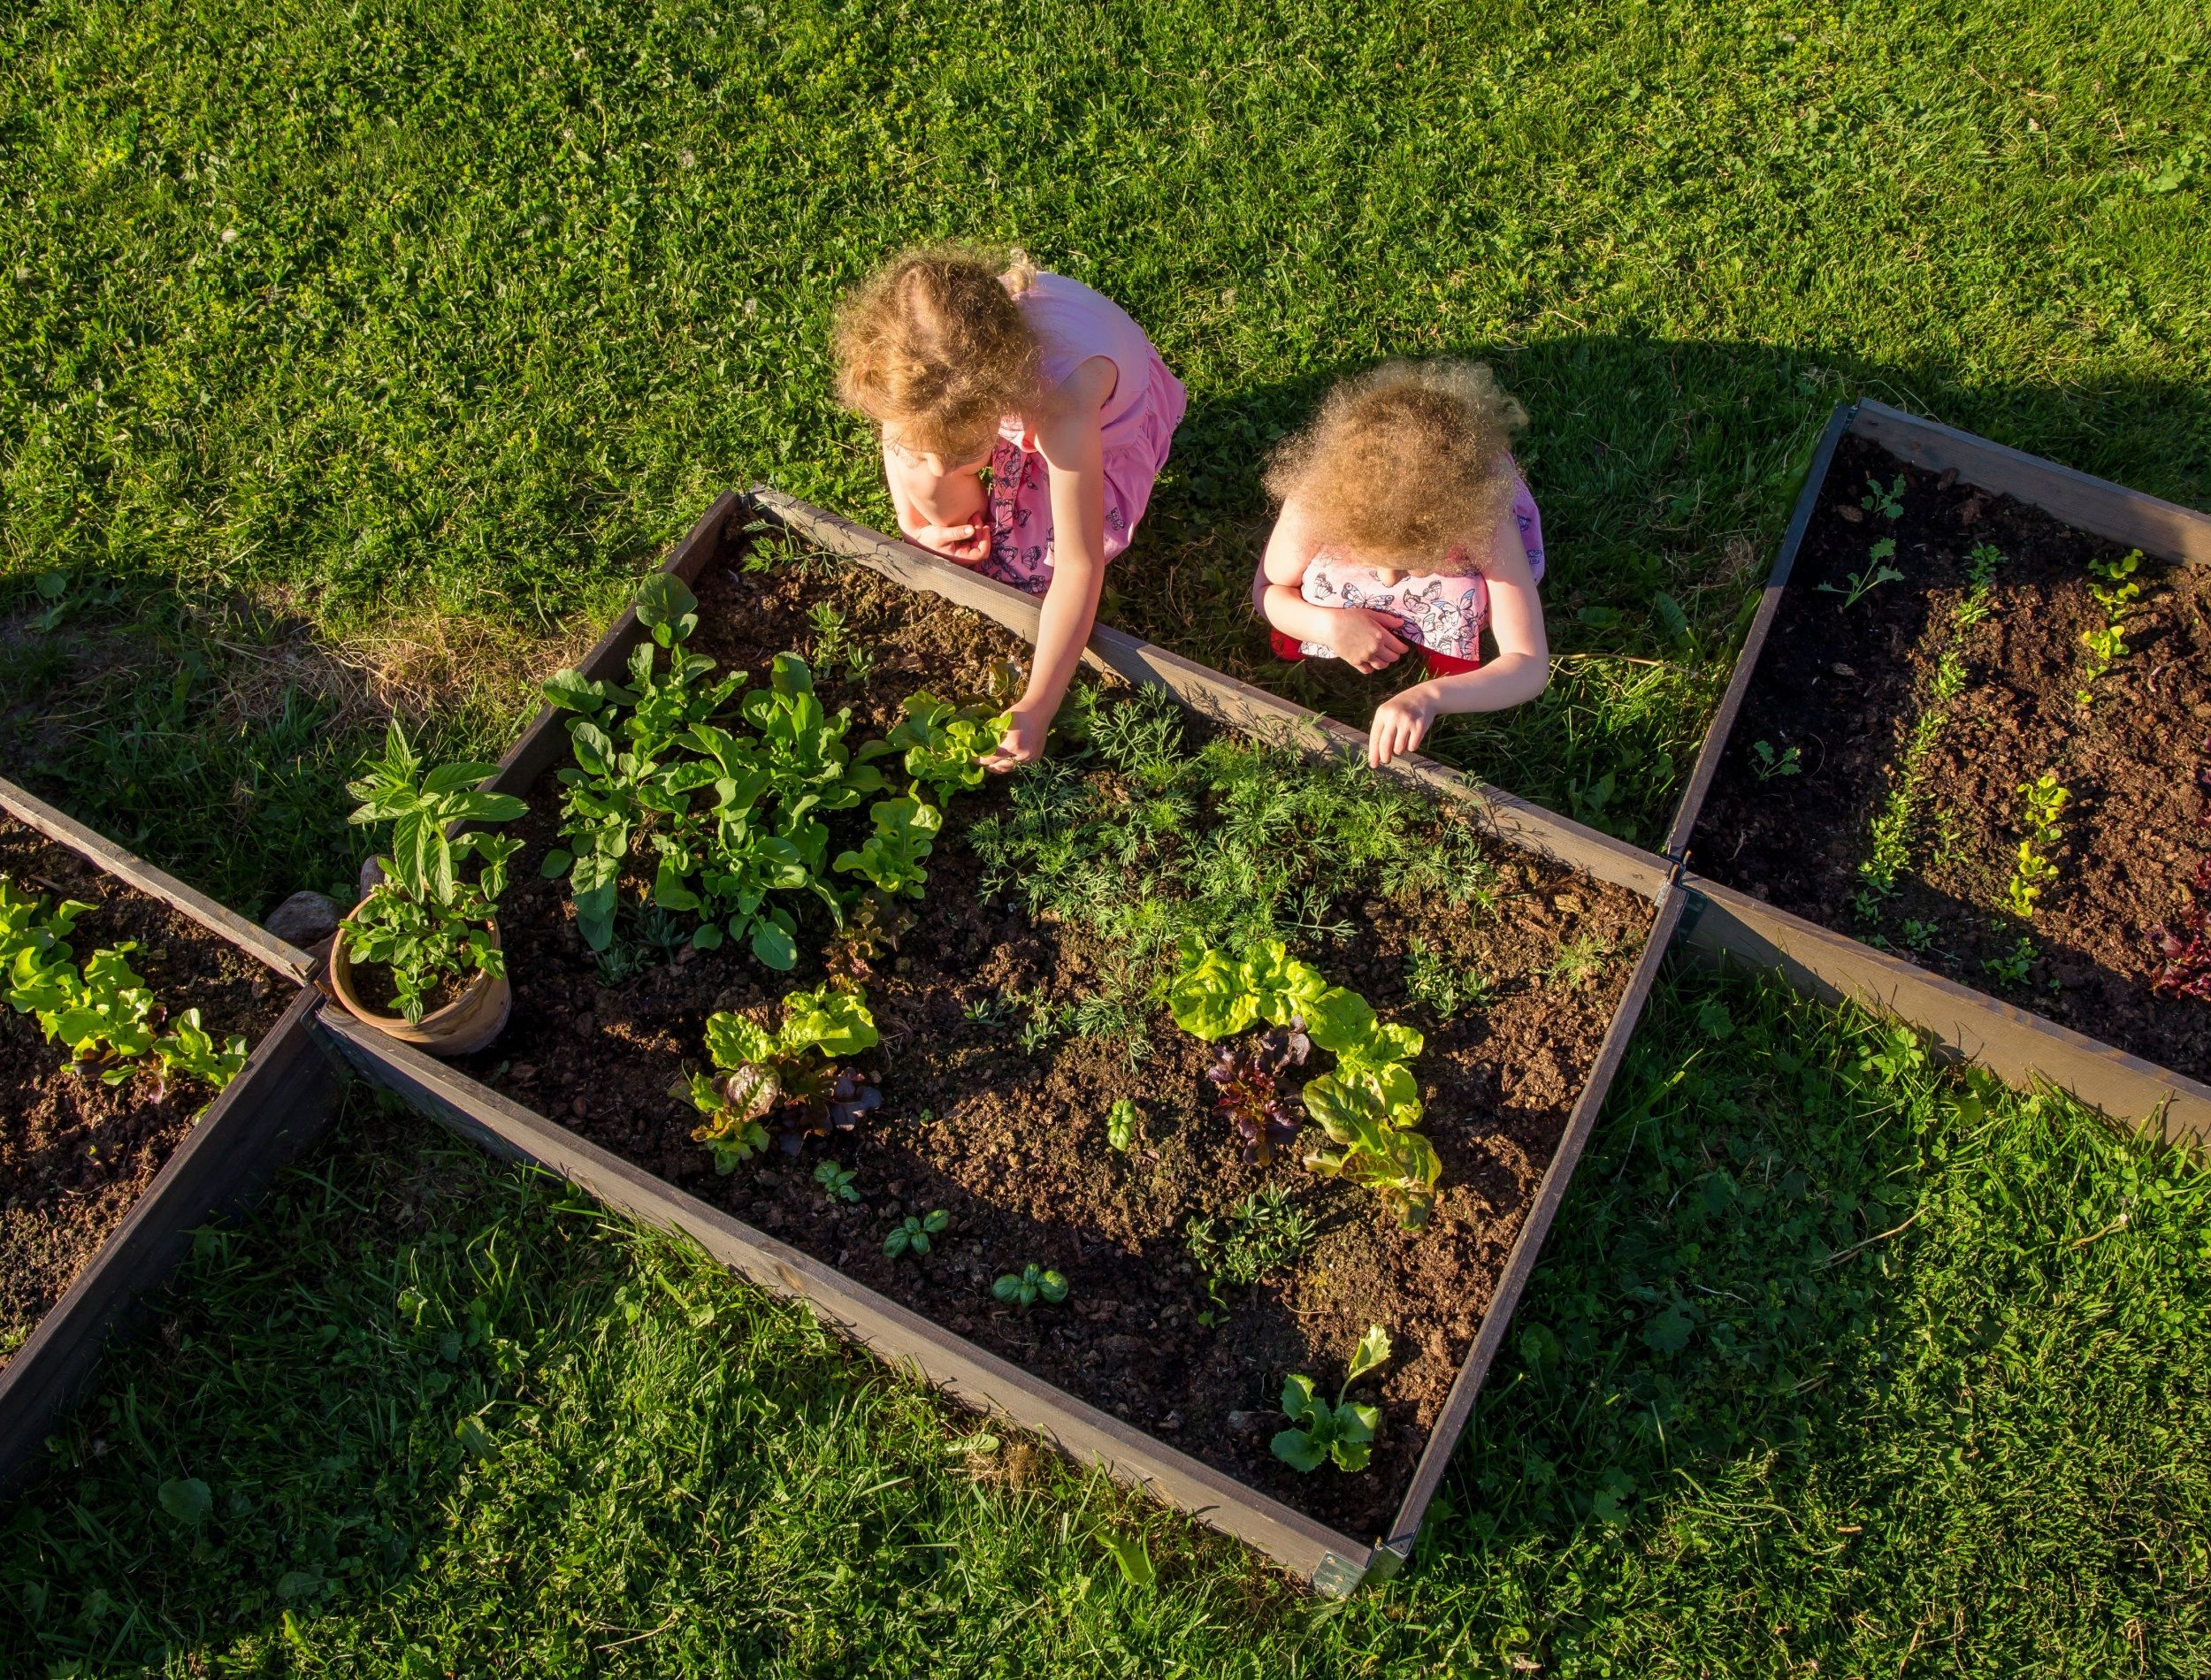 Children at community garden picking lettuce for eating. Boxes filled with soil and with various vegetable plants growing inside, raised bed. Sunny spring evening.